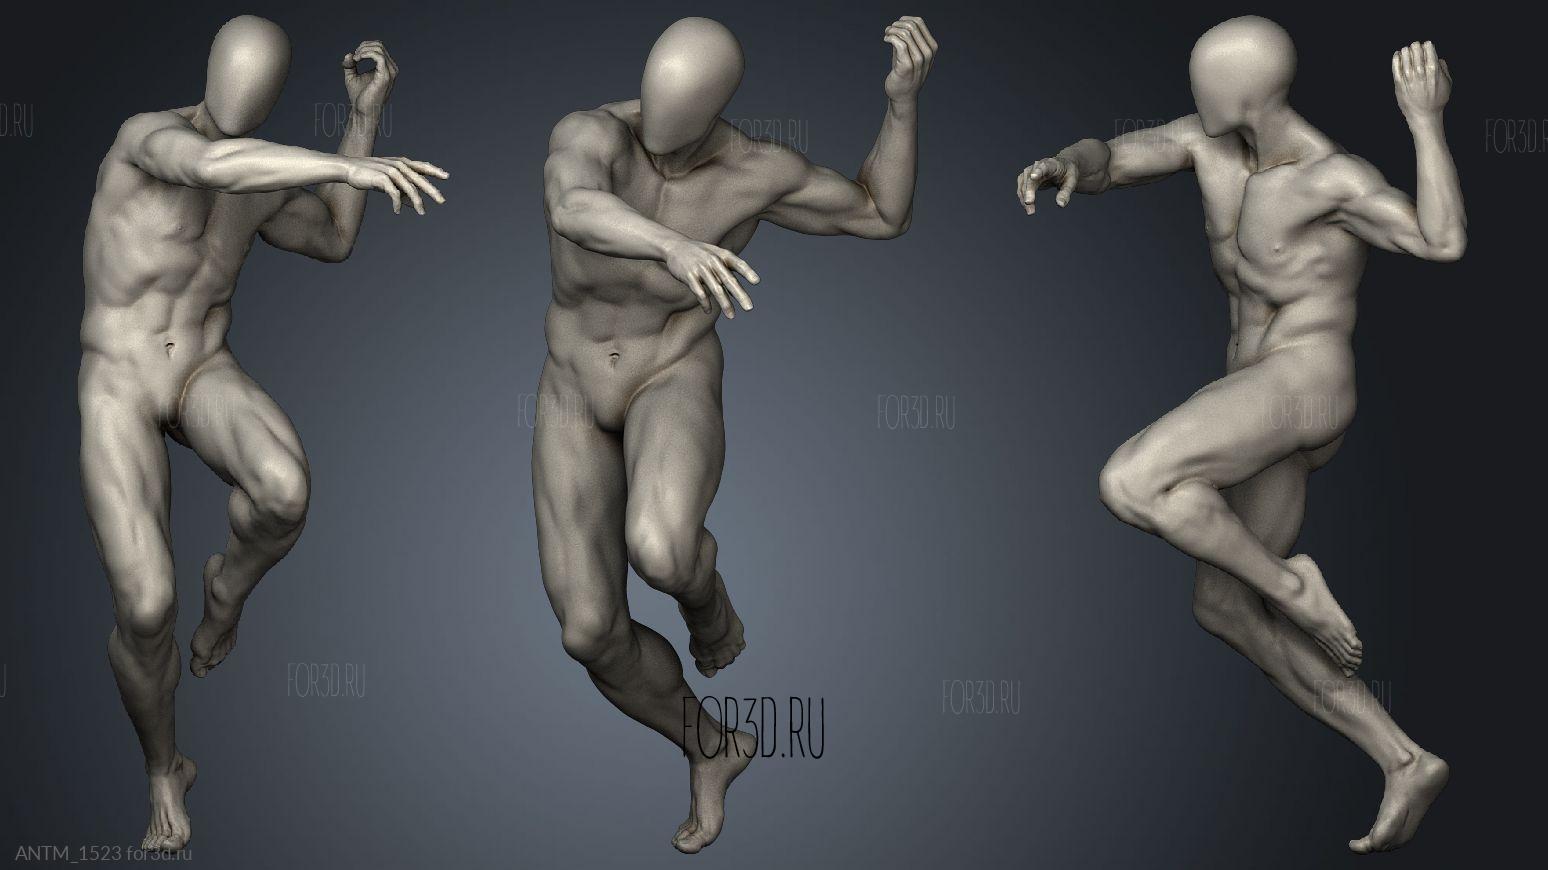 A Rookie's Guide to Sculpting an Anatomy Study